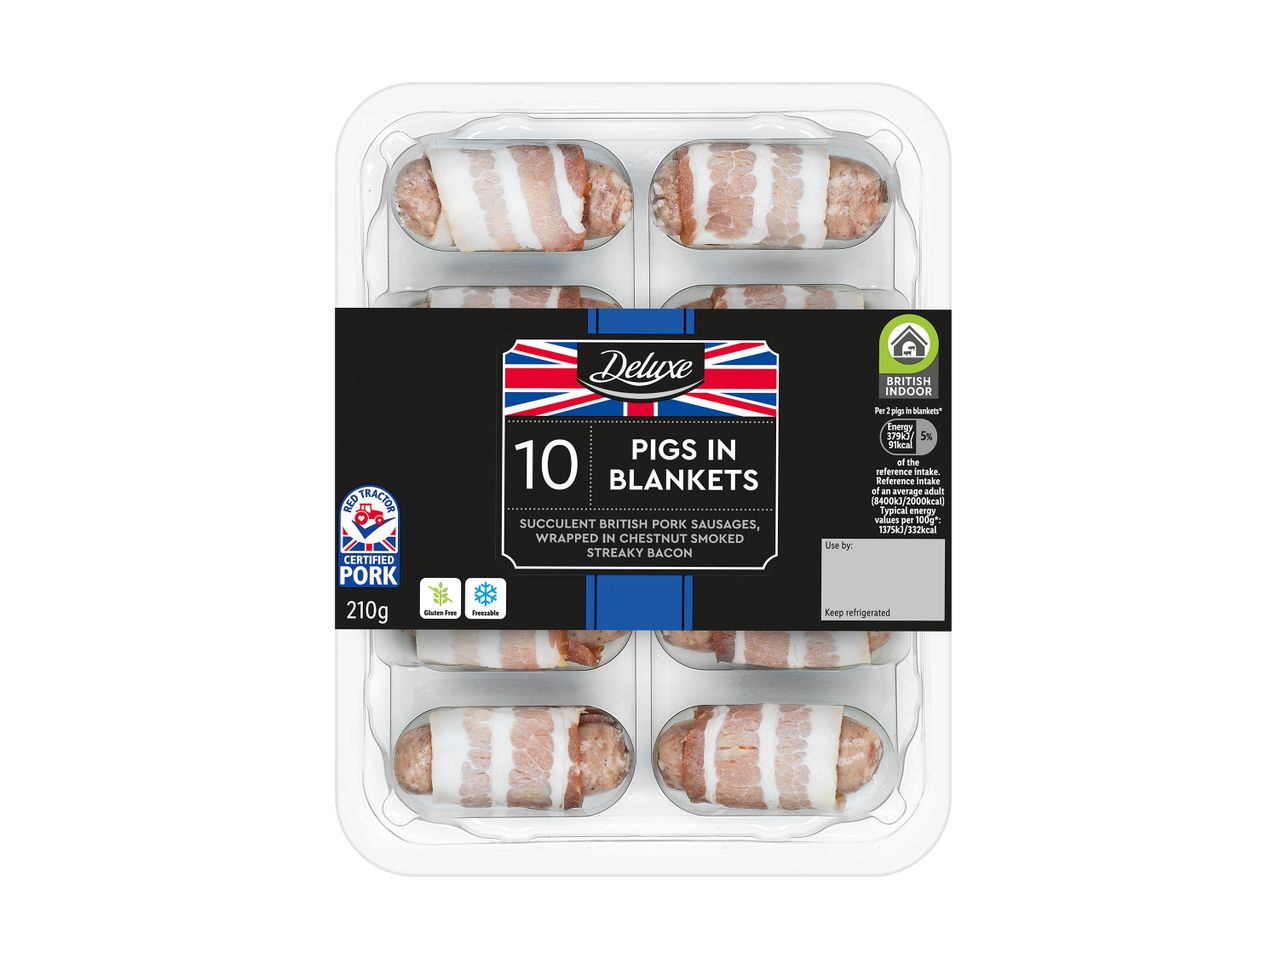 Go to full screen view: Deluxe Pigs in Blankets - Image 1